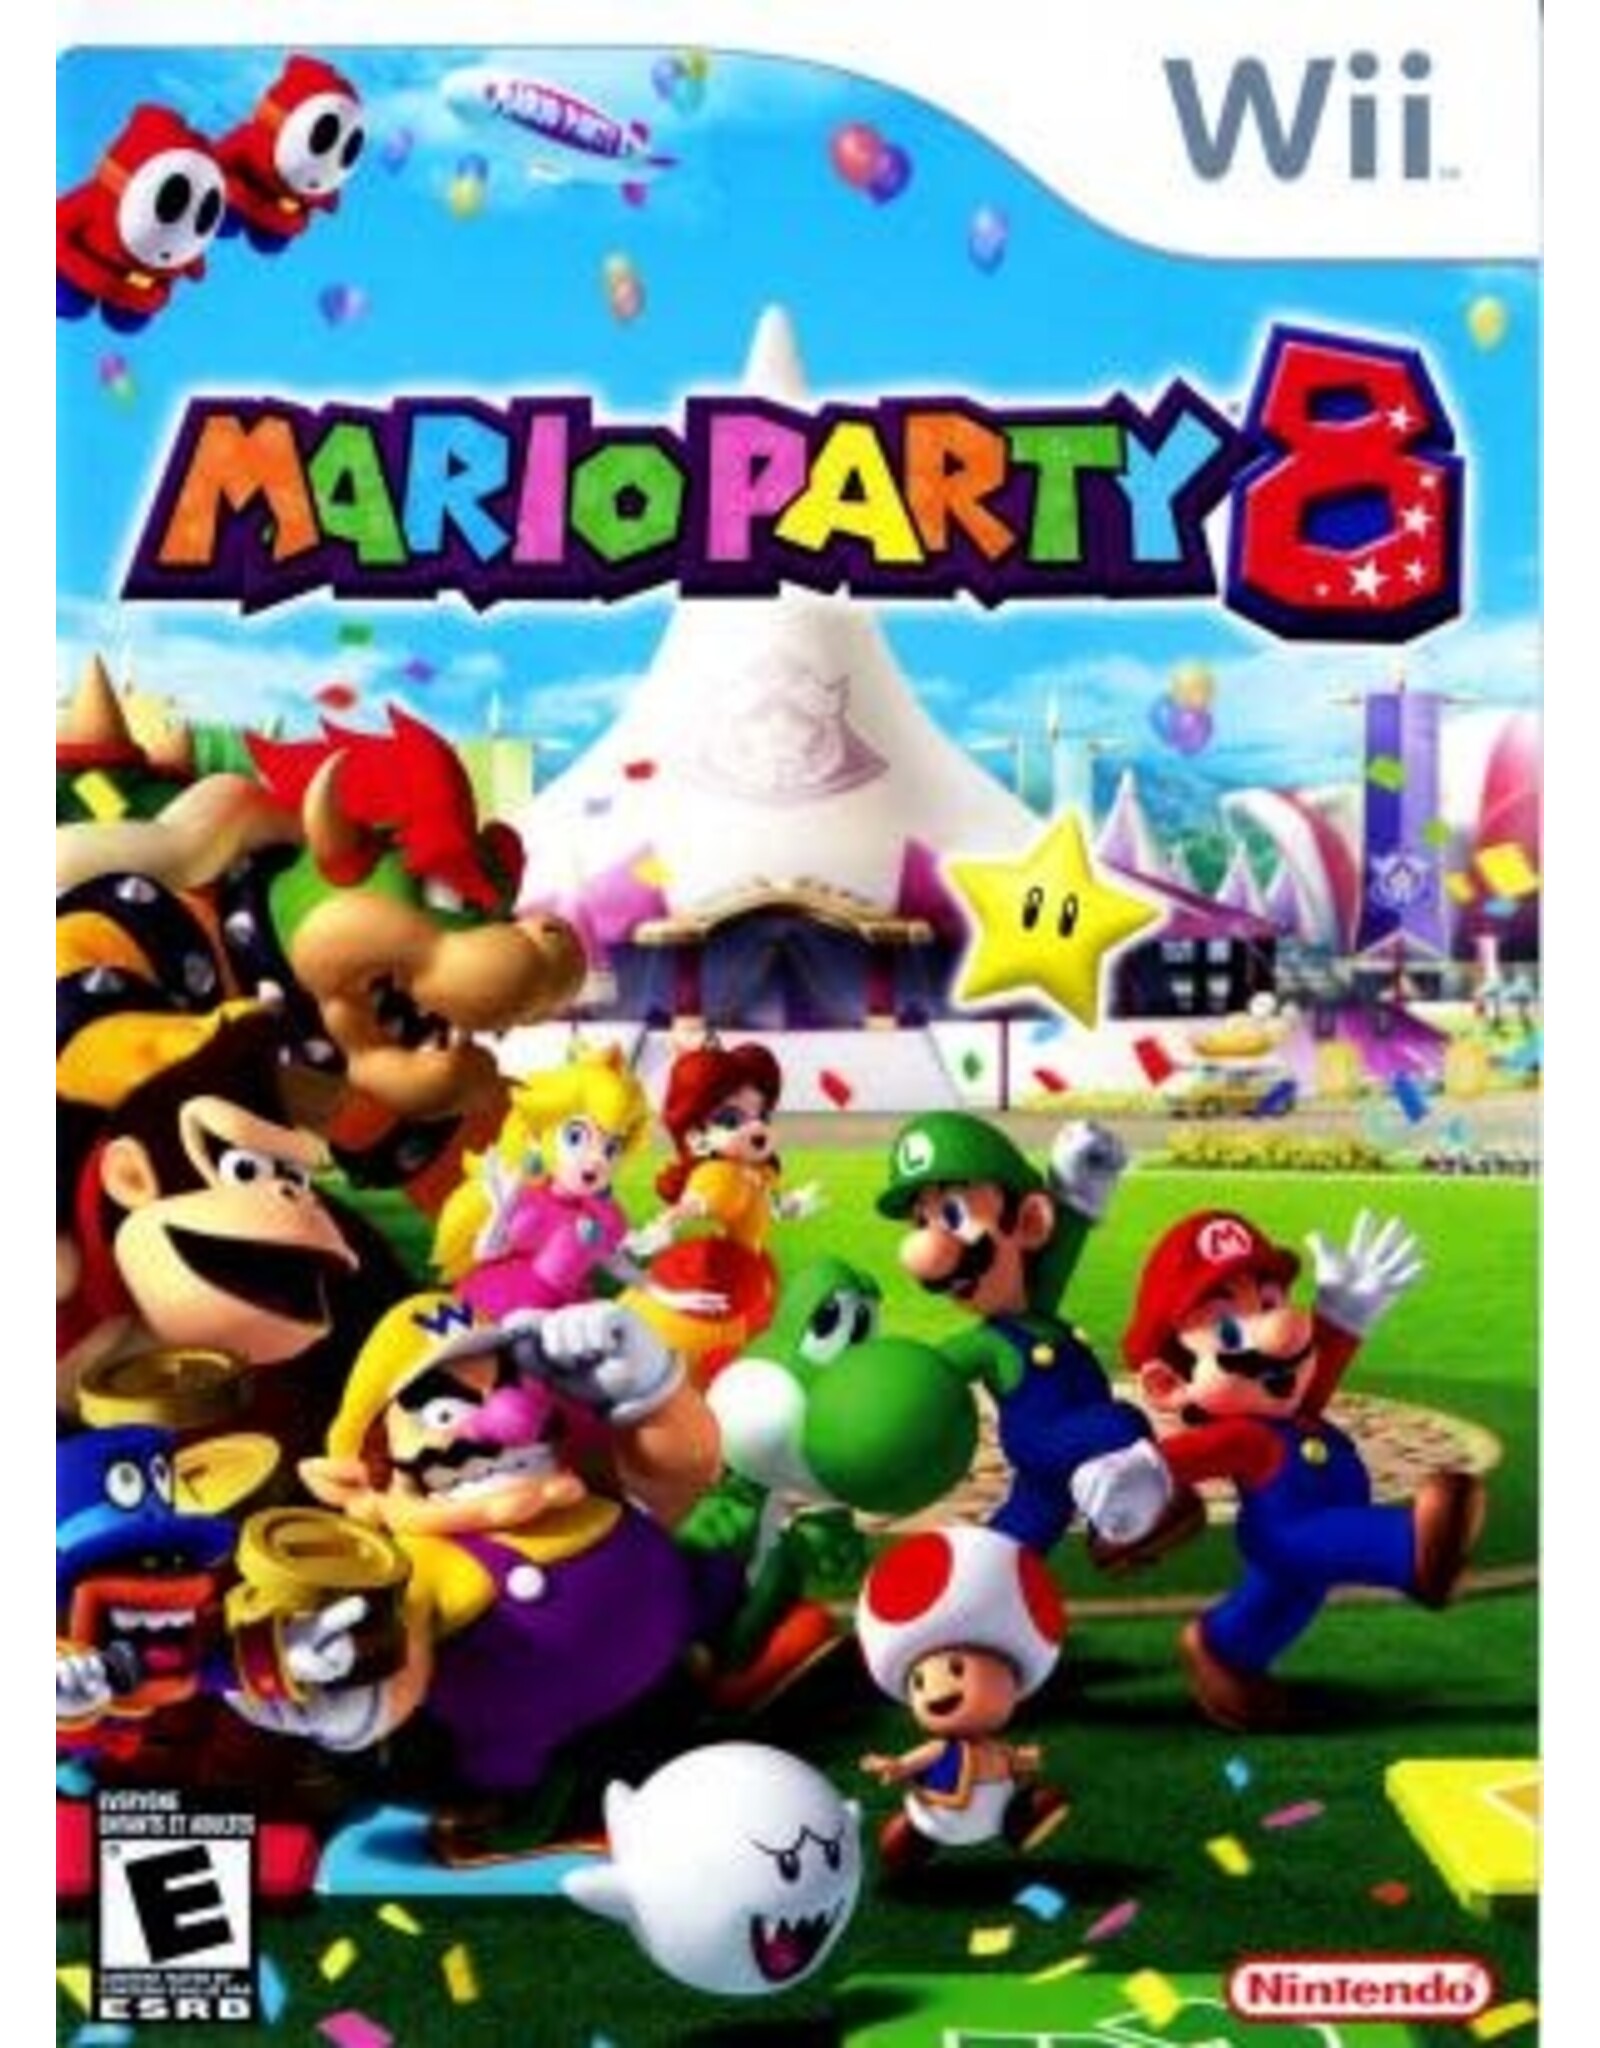 Wii Mario Party 8 (Used)